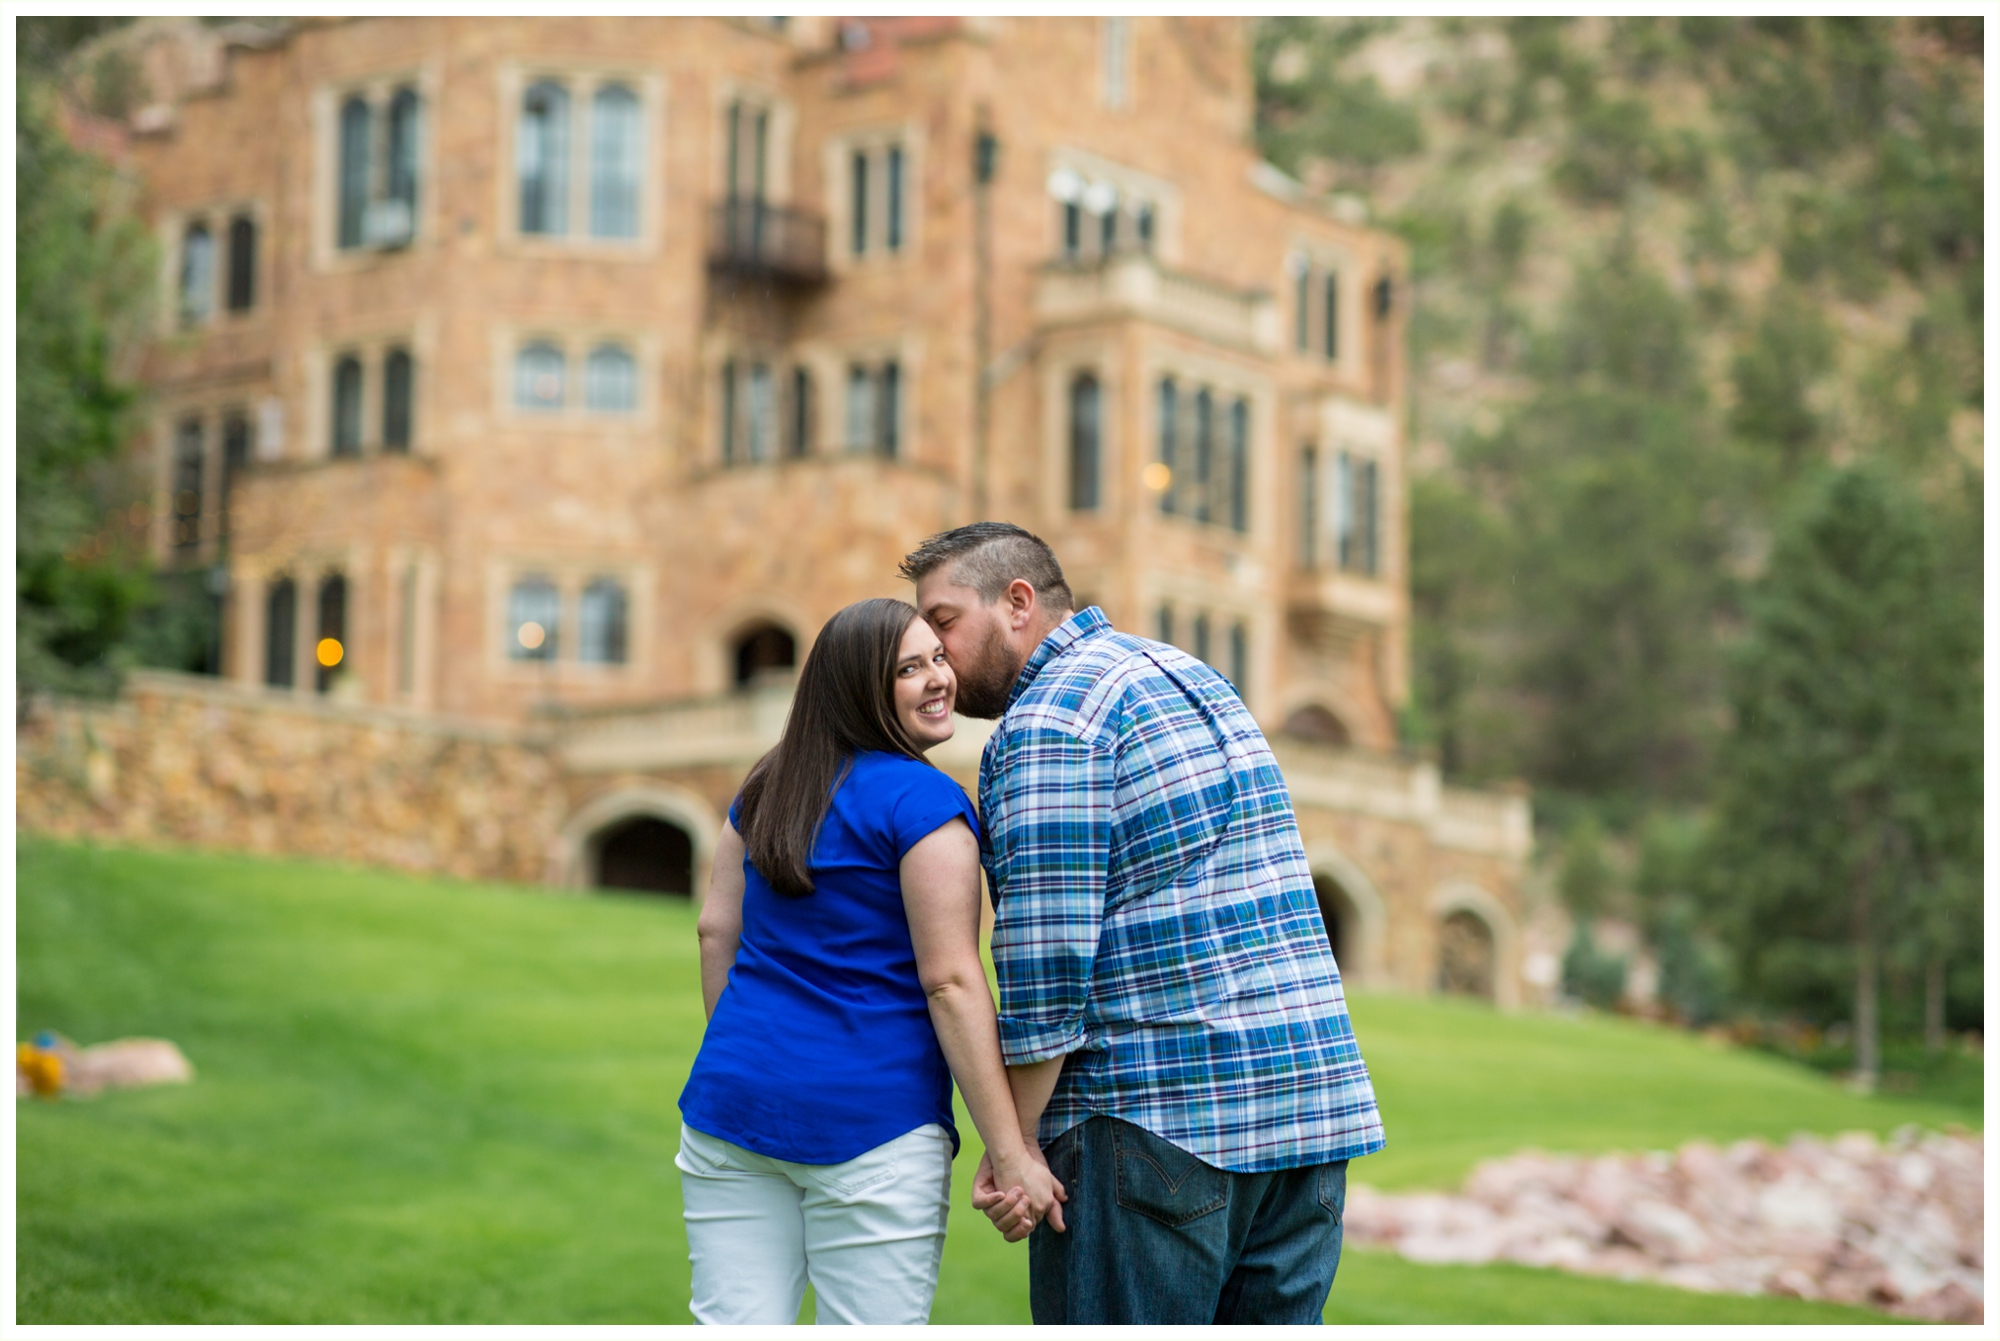 sweetest couple for colorado springs engagement session at glen eyrie castle near garden of the gods